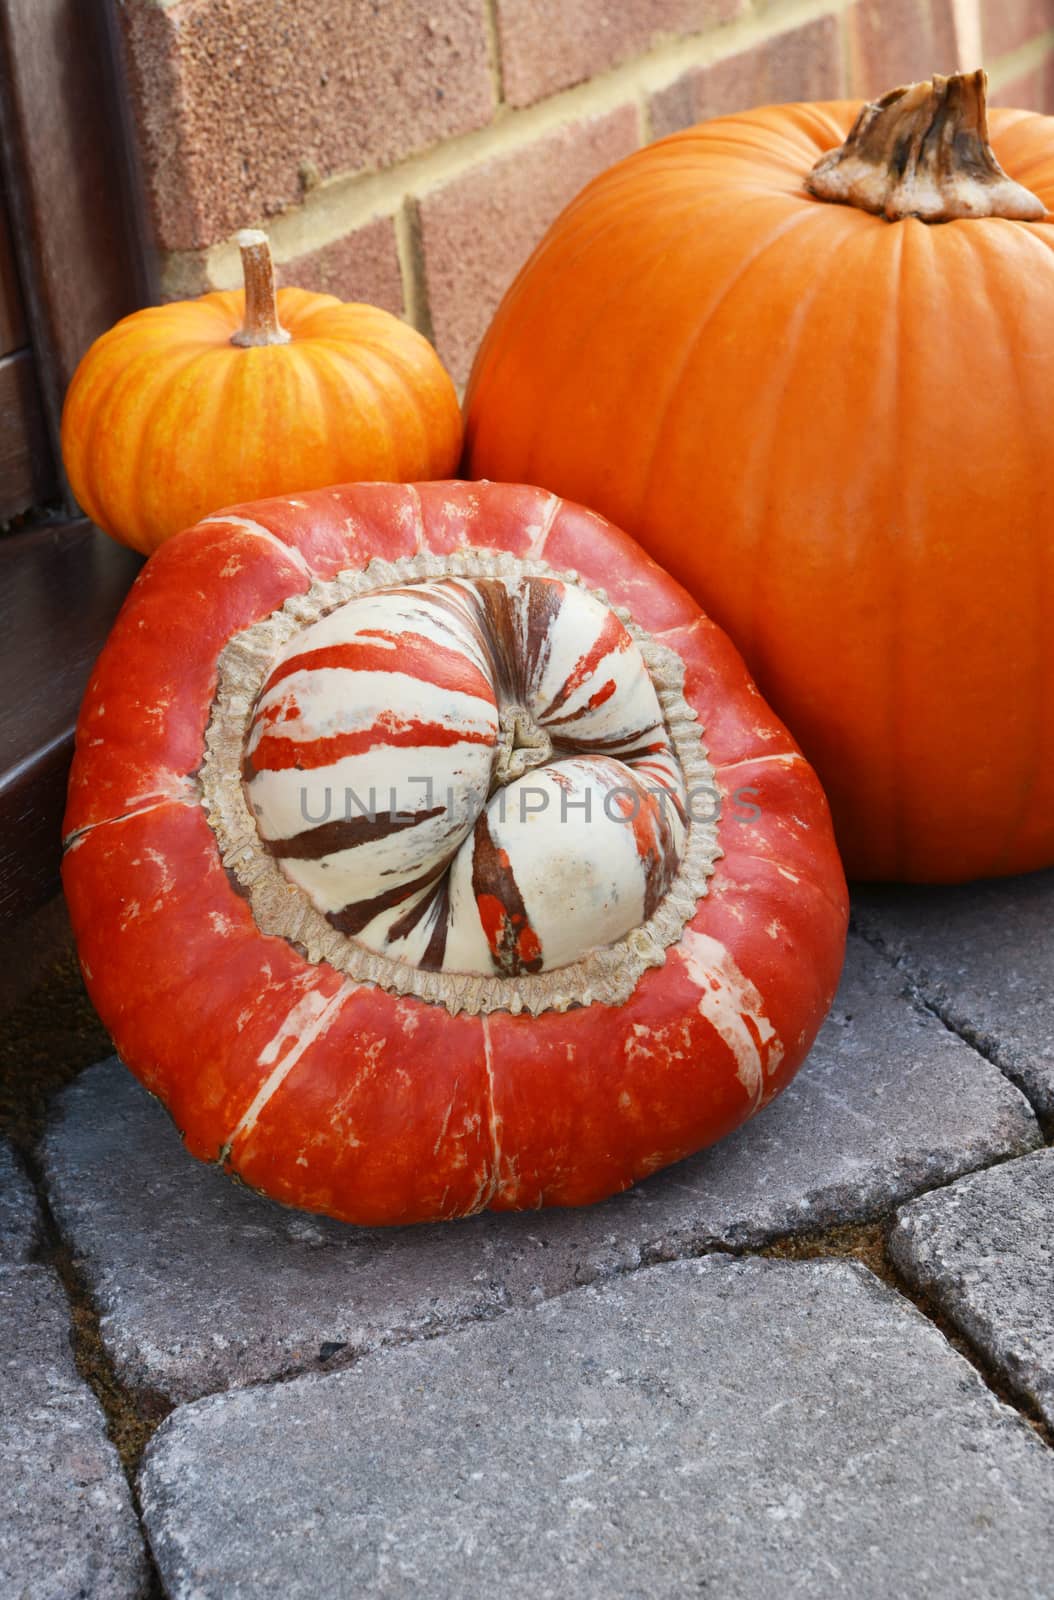 Striped Turks Turban gourd and pumpkins on a doorstep  by sarahdoow